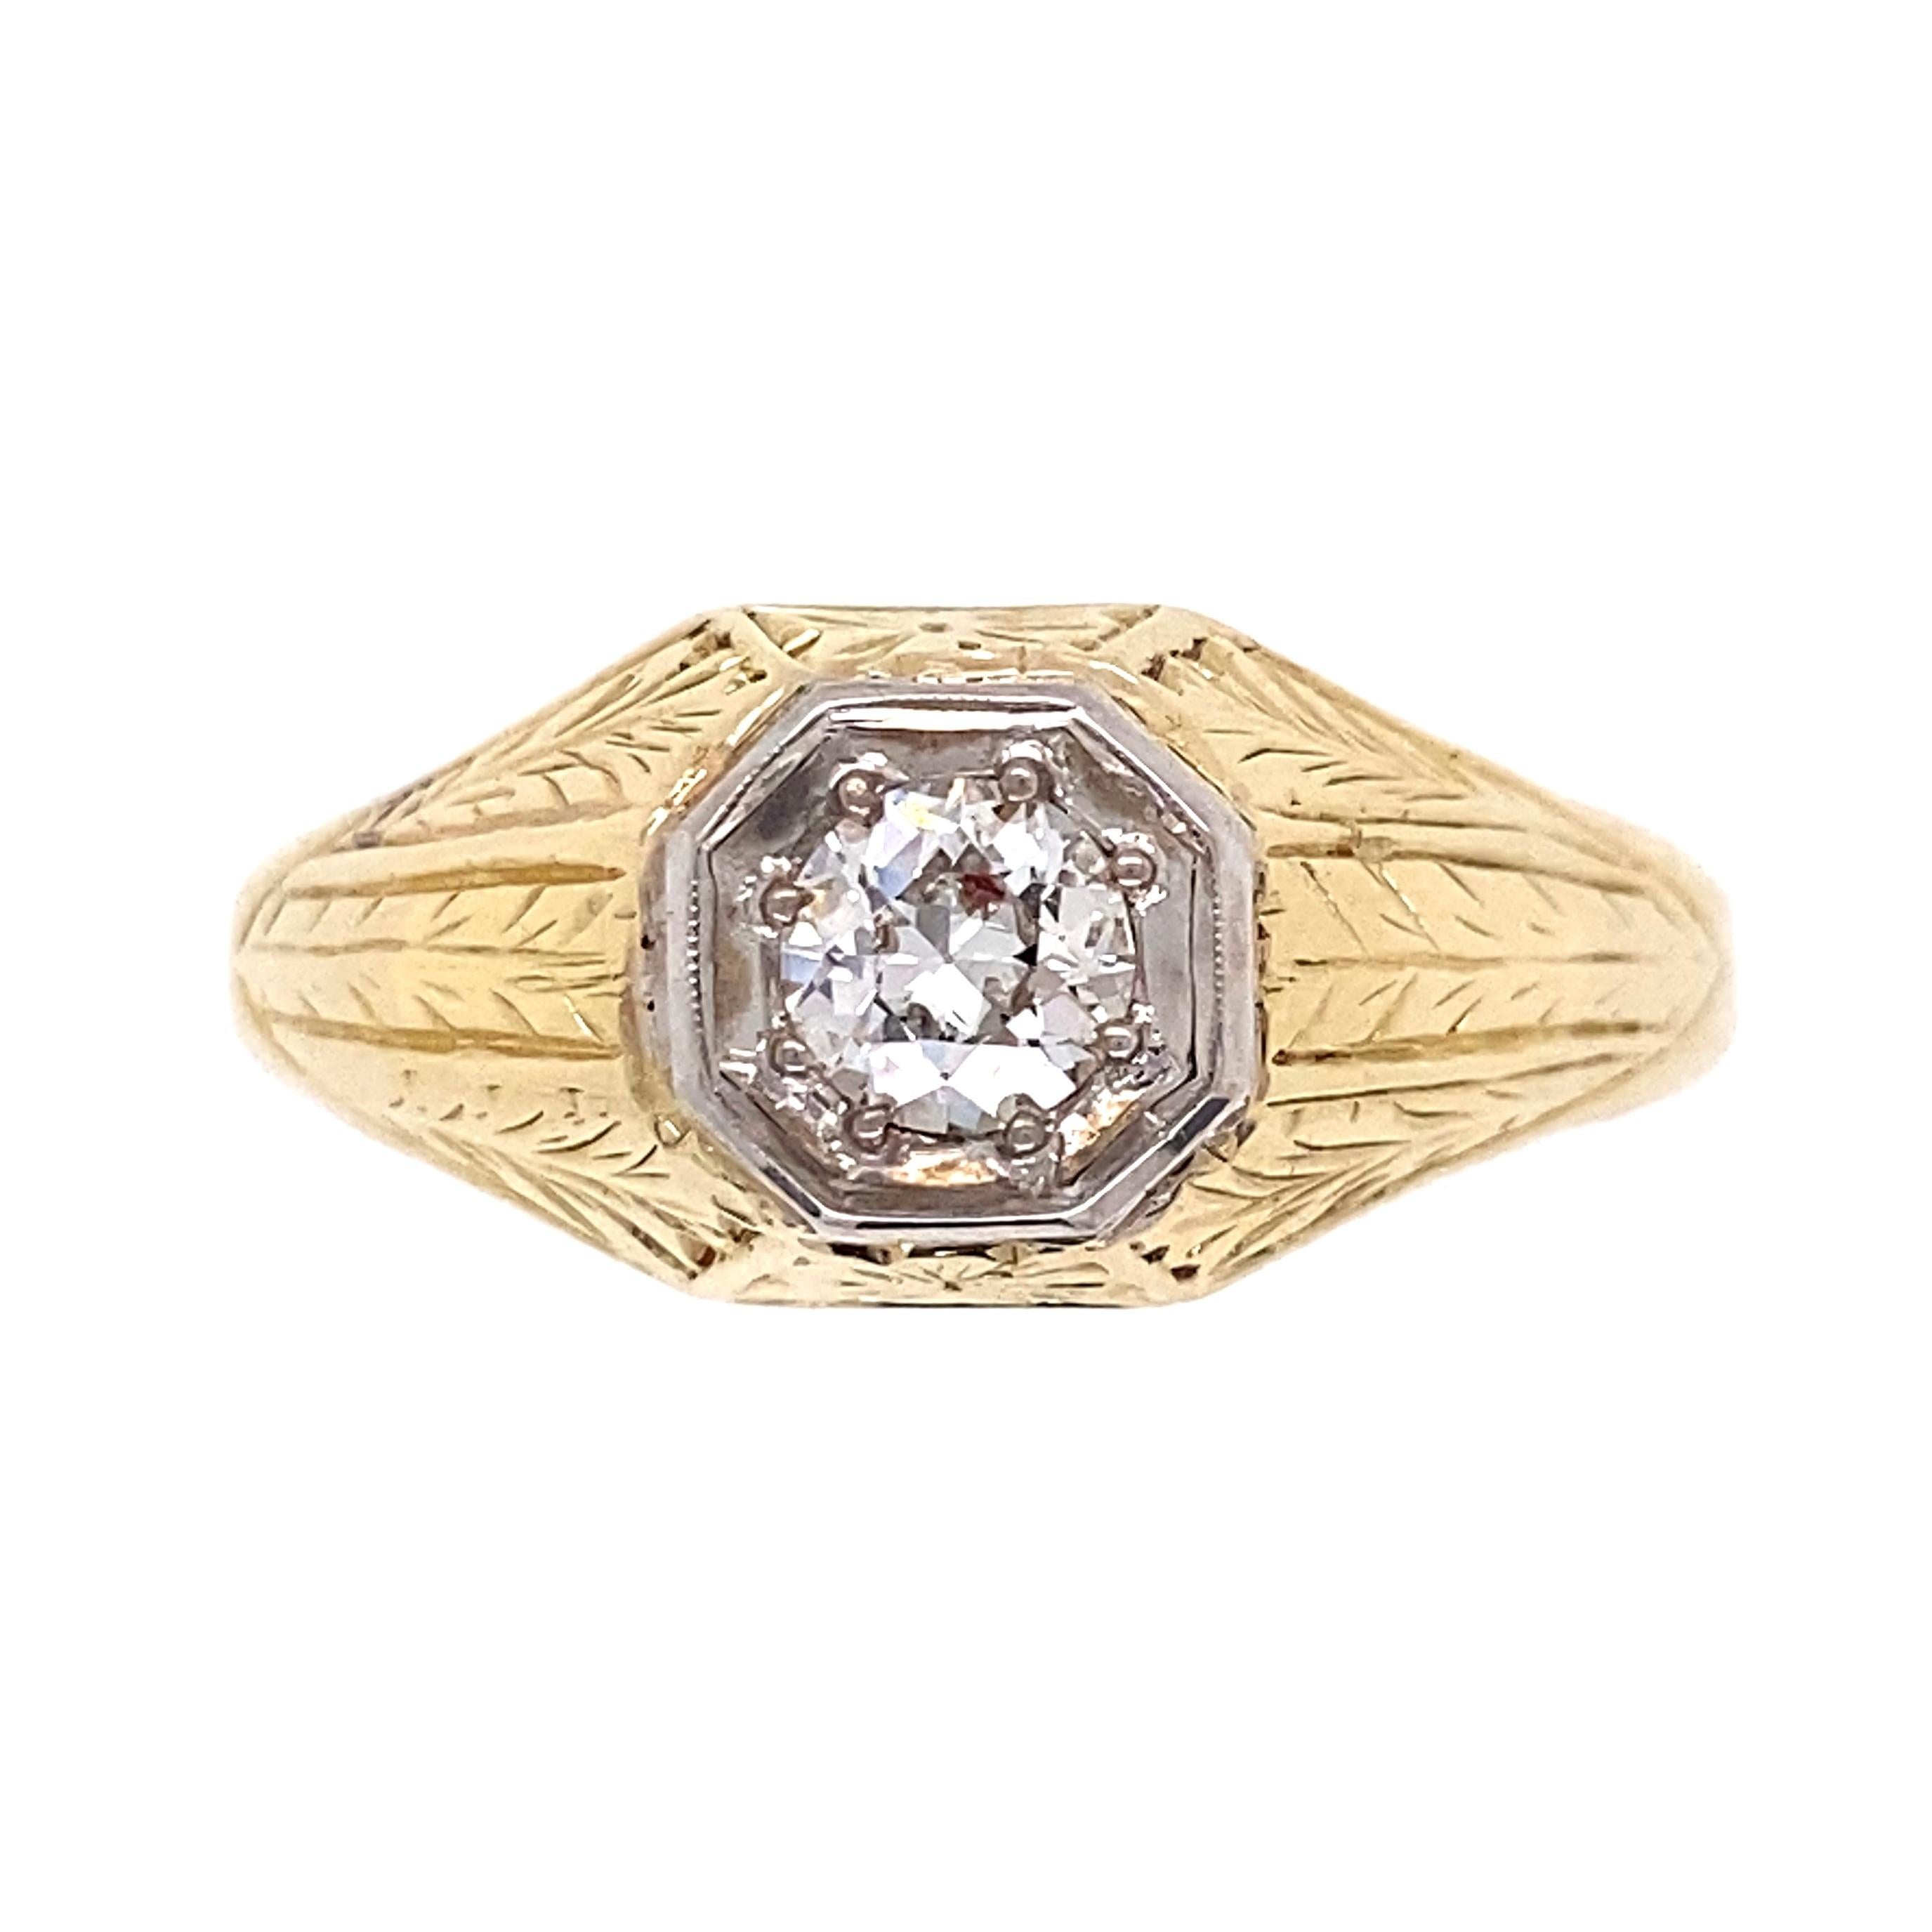 Fine Men’s Old European Cut Diamond Art Deco Gold Ring Estate Fine Jewelry In Excellent Condition For Sale In Montreal, QC